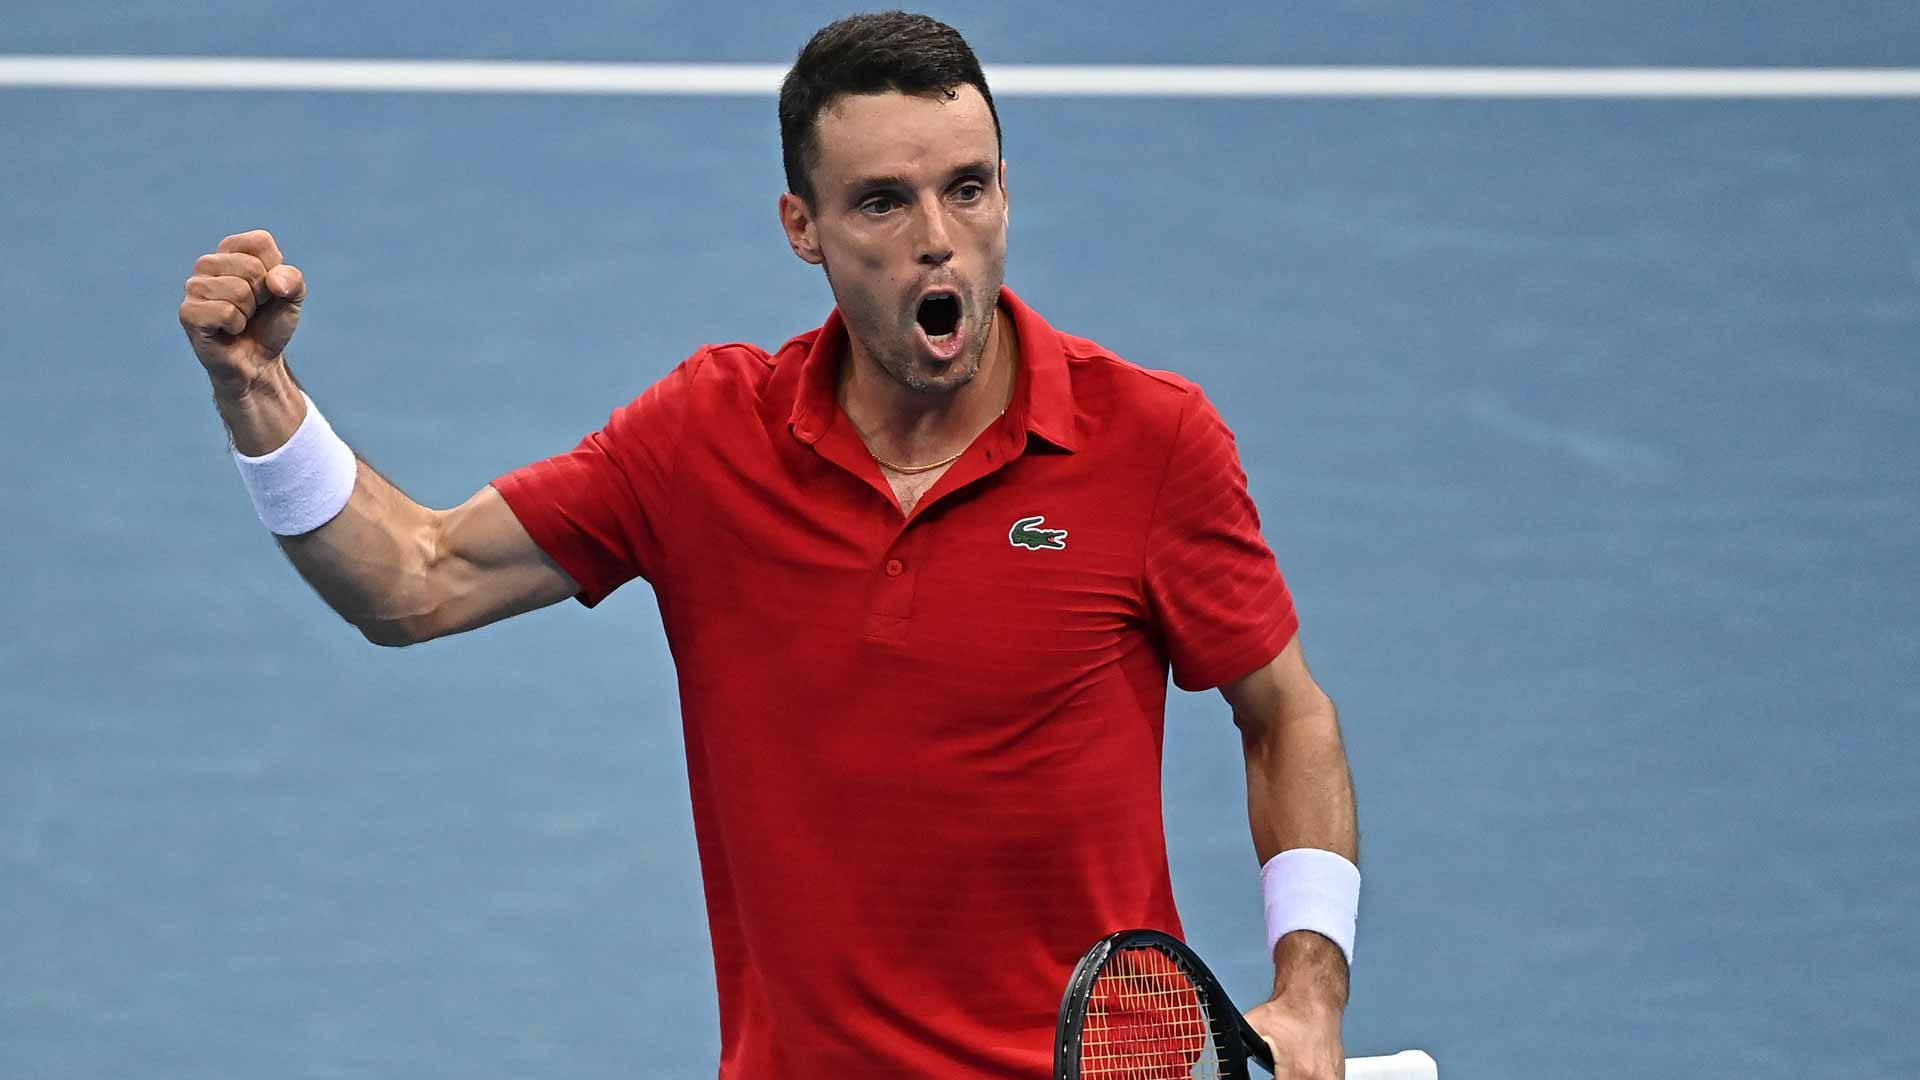 Roberto Bautista Agut Clenched Fist Raised Wallpaper